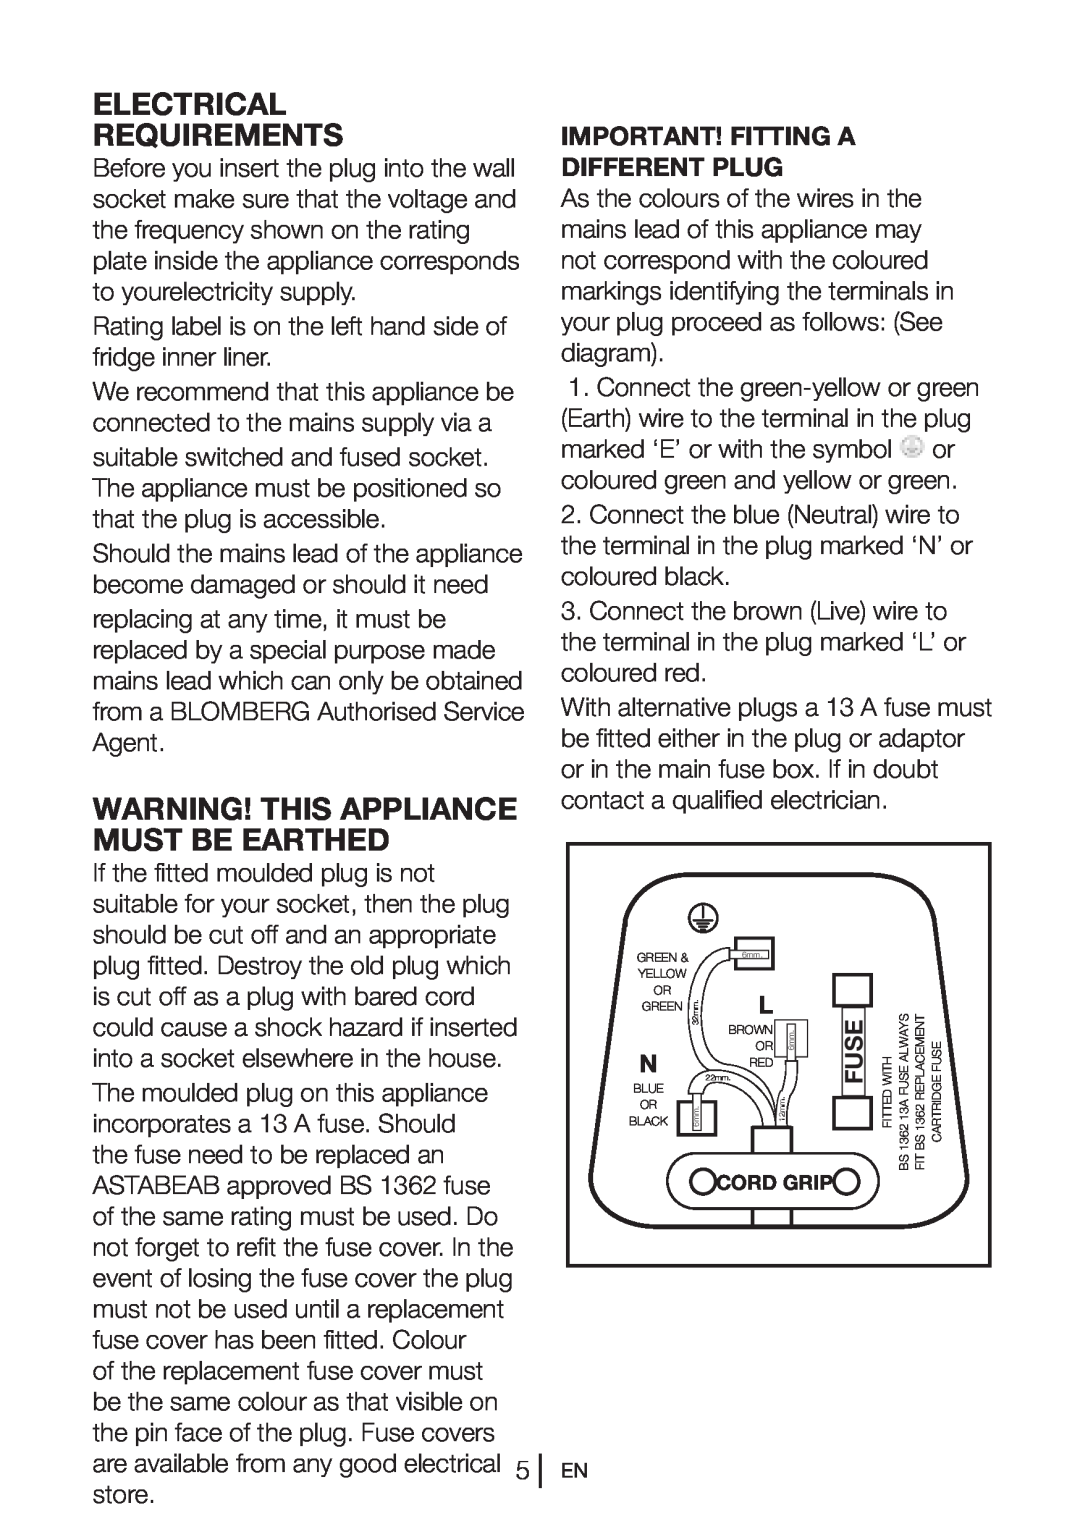 Blomberg KGM 9690 PX Electrical Requirements, Warning! This Appliance Must Be Earthed, Important! Fitting A Different Plug 